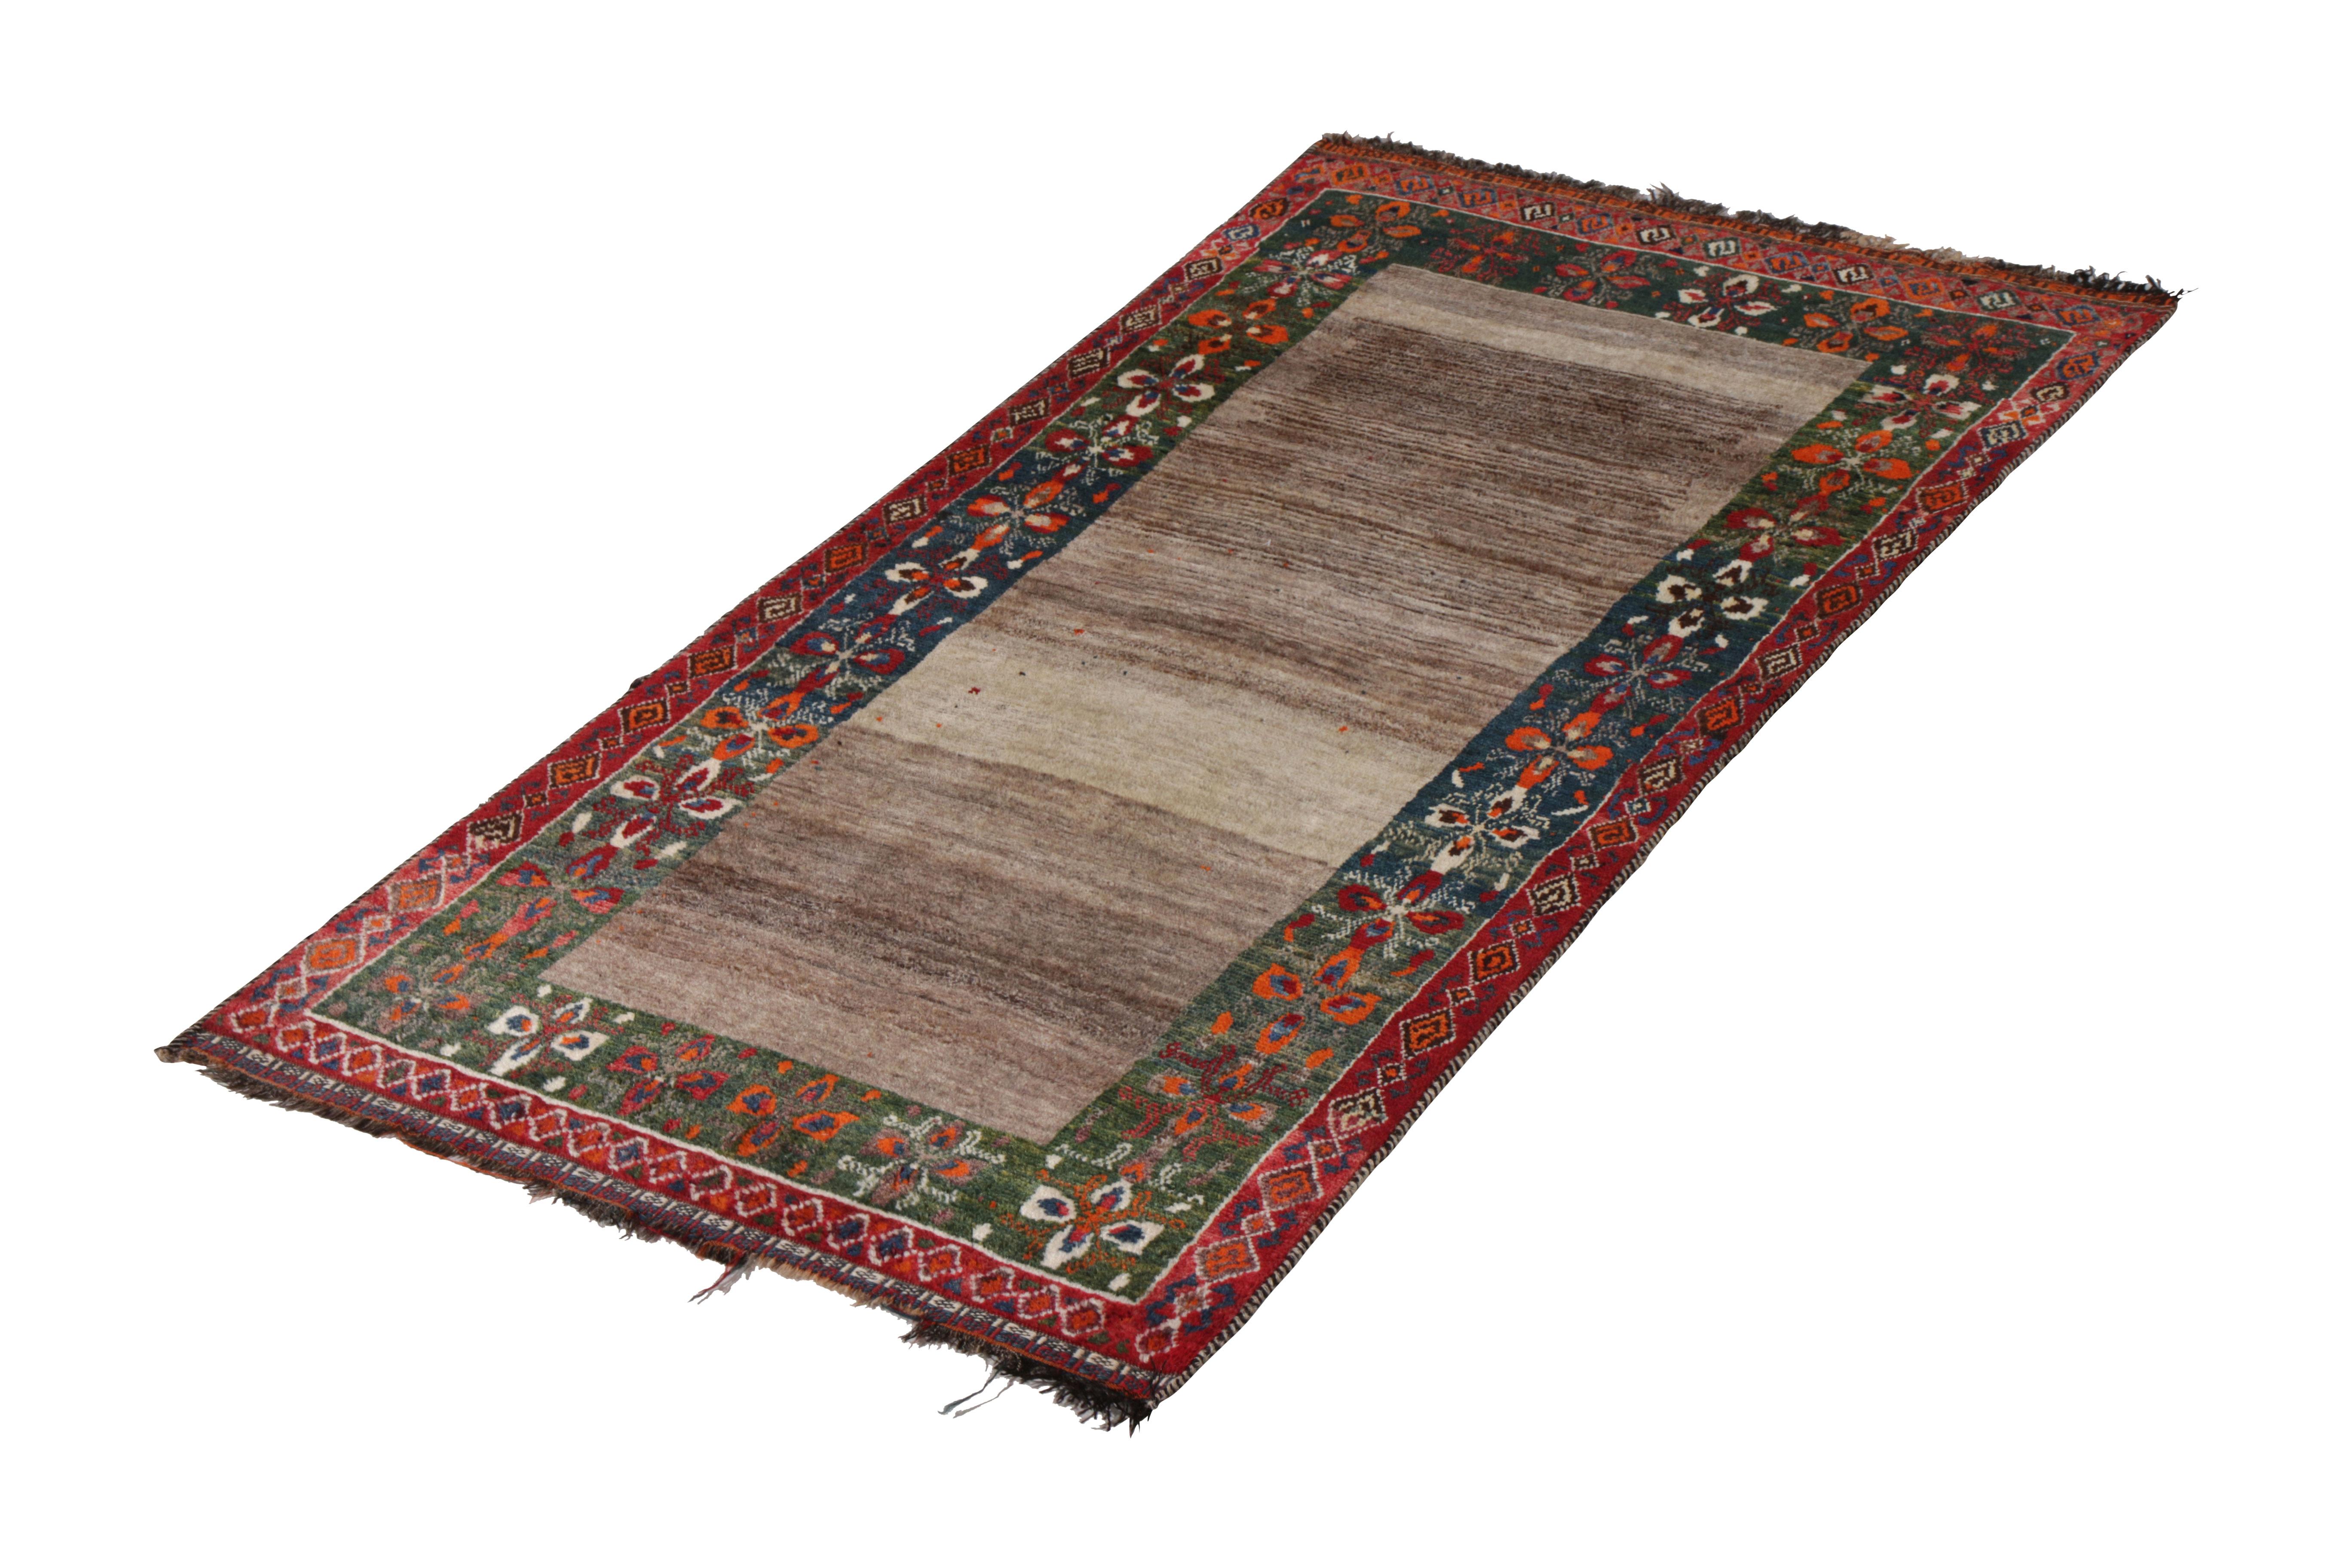 Hand knotted in wool pile originating circa 1950-1960, this vintage Persian rug connotes a midcentury Gabbeh tribal rug design, further remarking a rare play of gray, red, and green colorways with an equally uncommon dual border around the abrashed